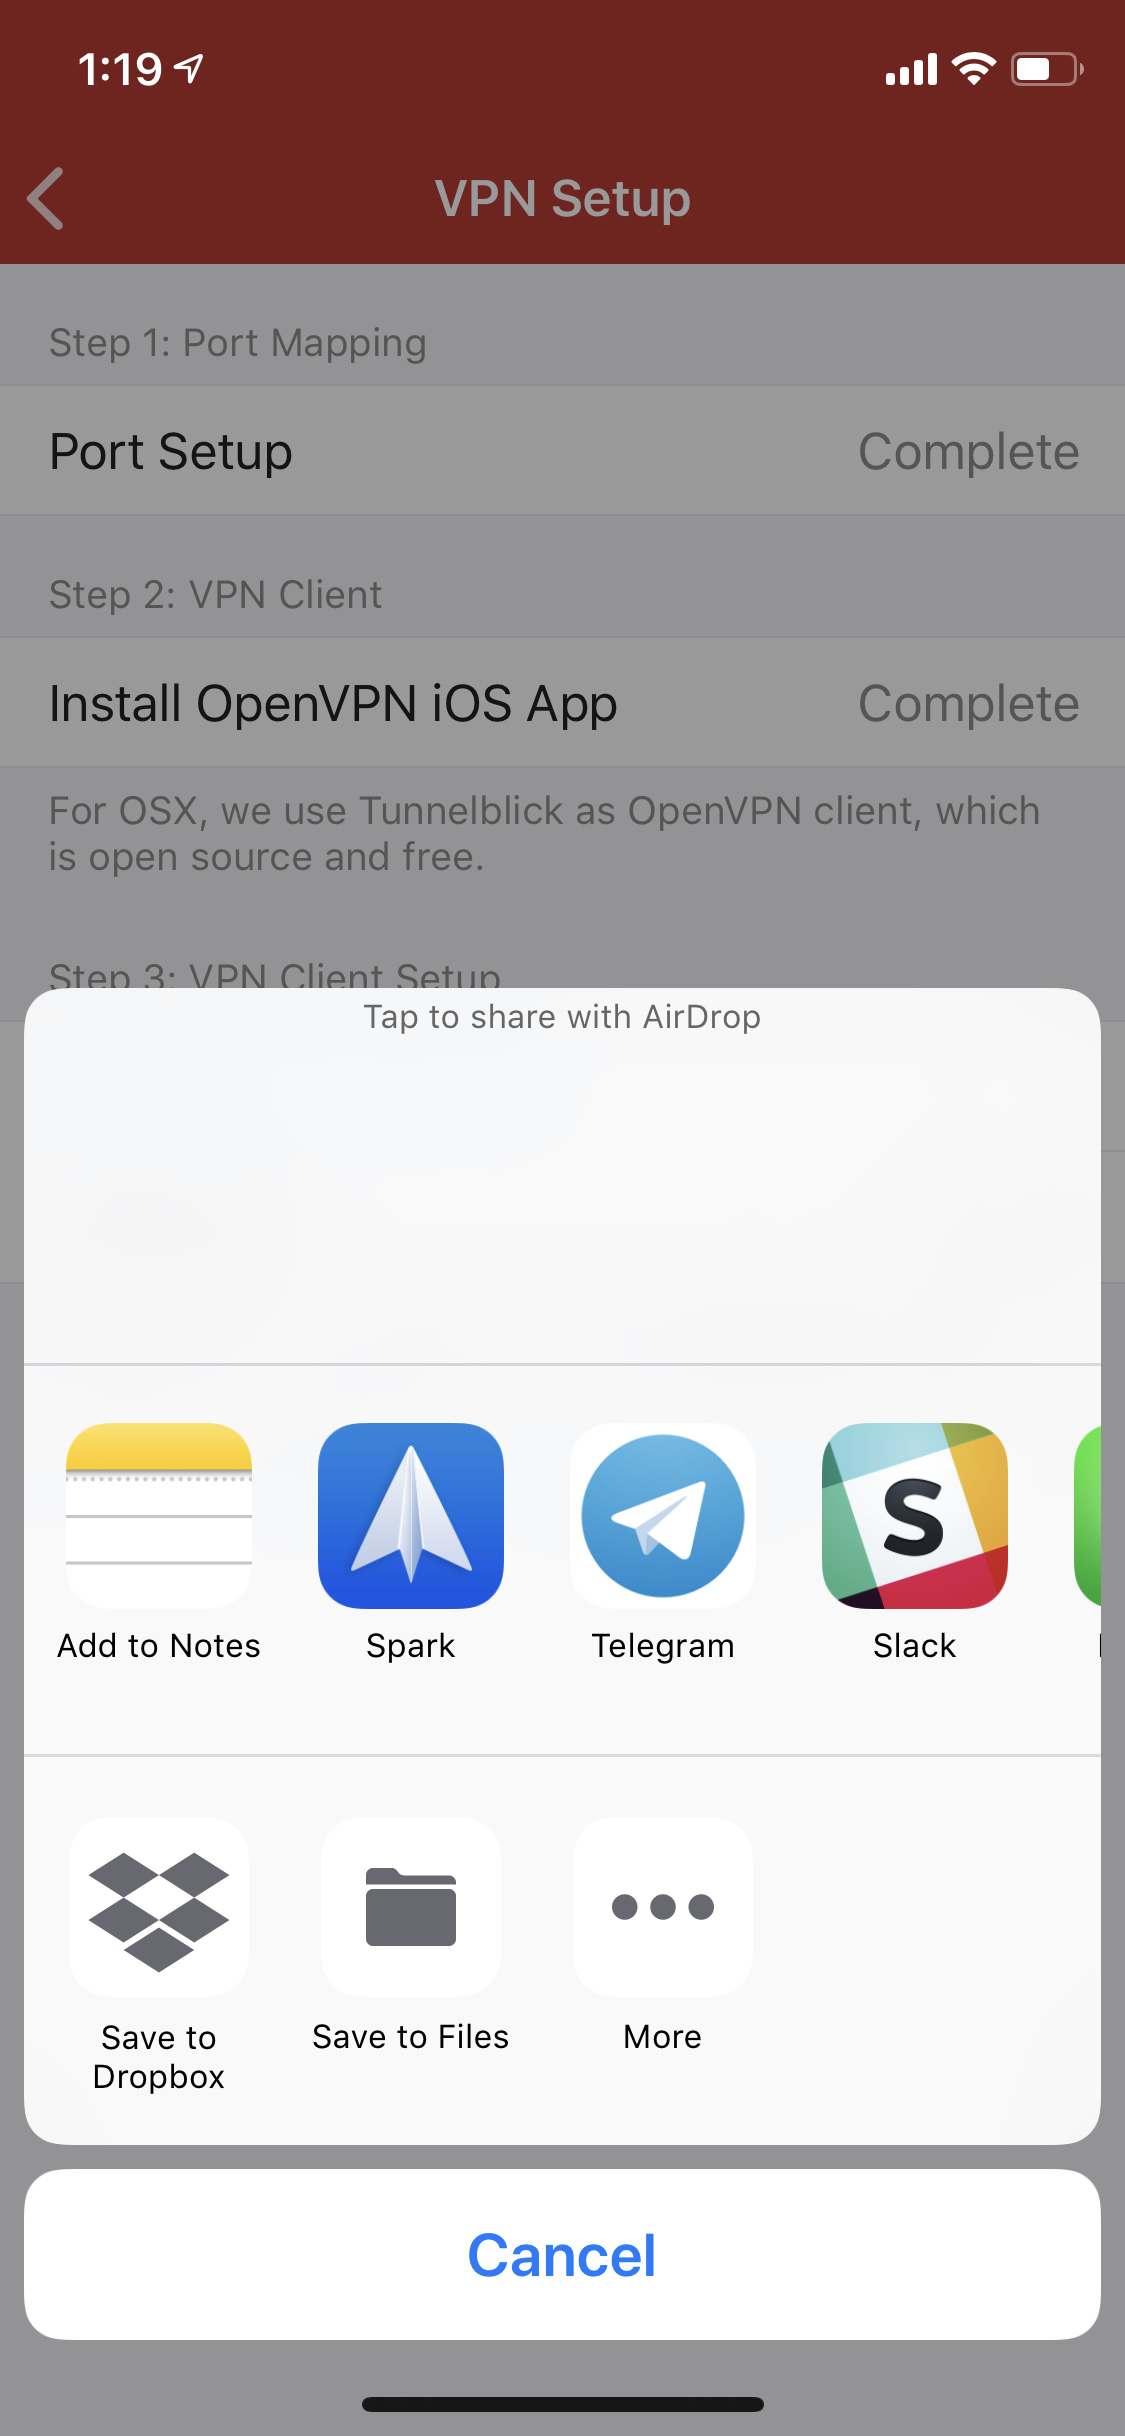 Firewalla IOS share menu with options to send VPN profile via Email OR Dropbox to deliver Firewalla VPN profile to a Windows machine.